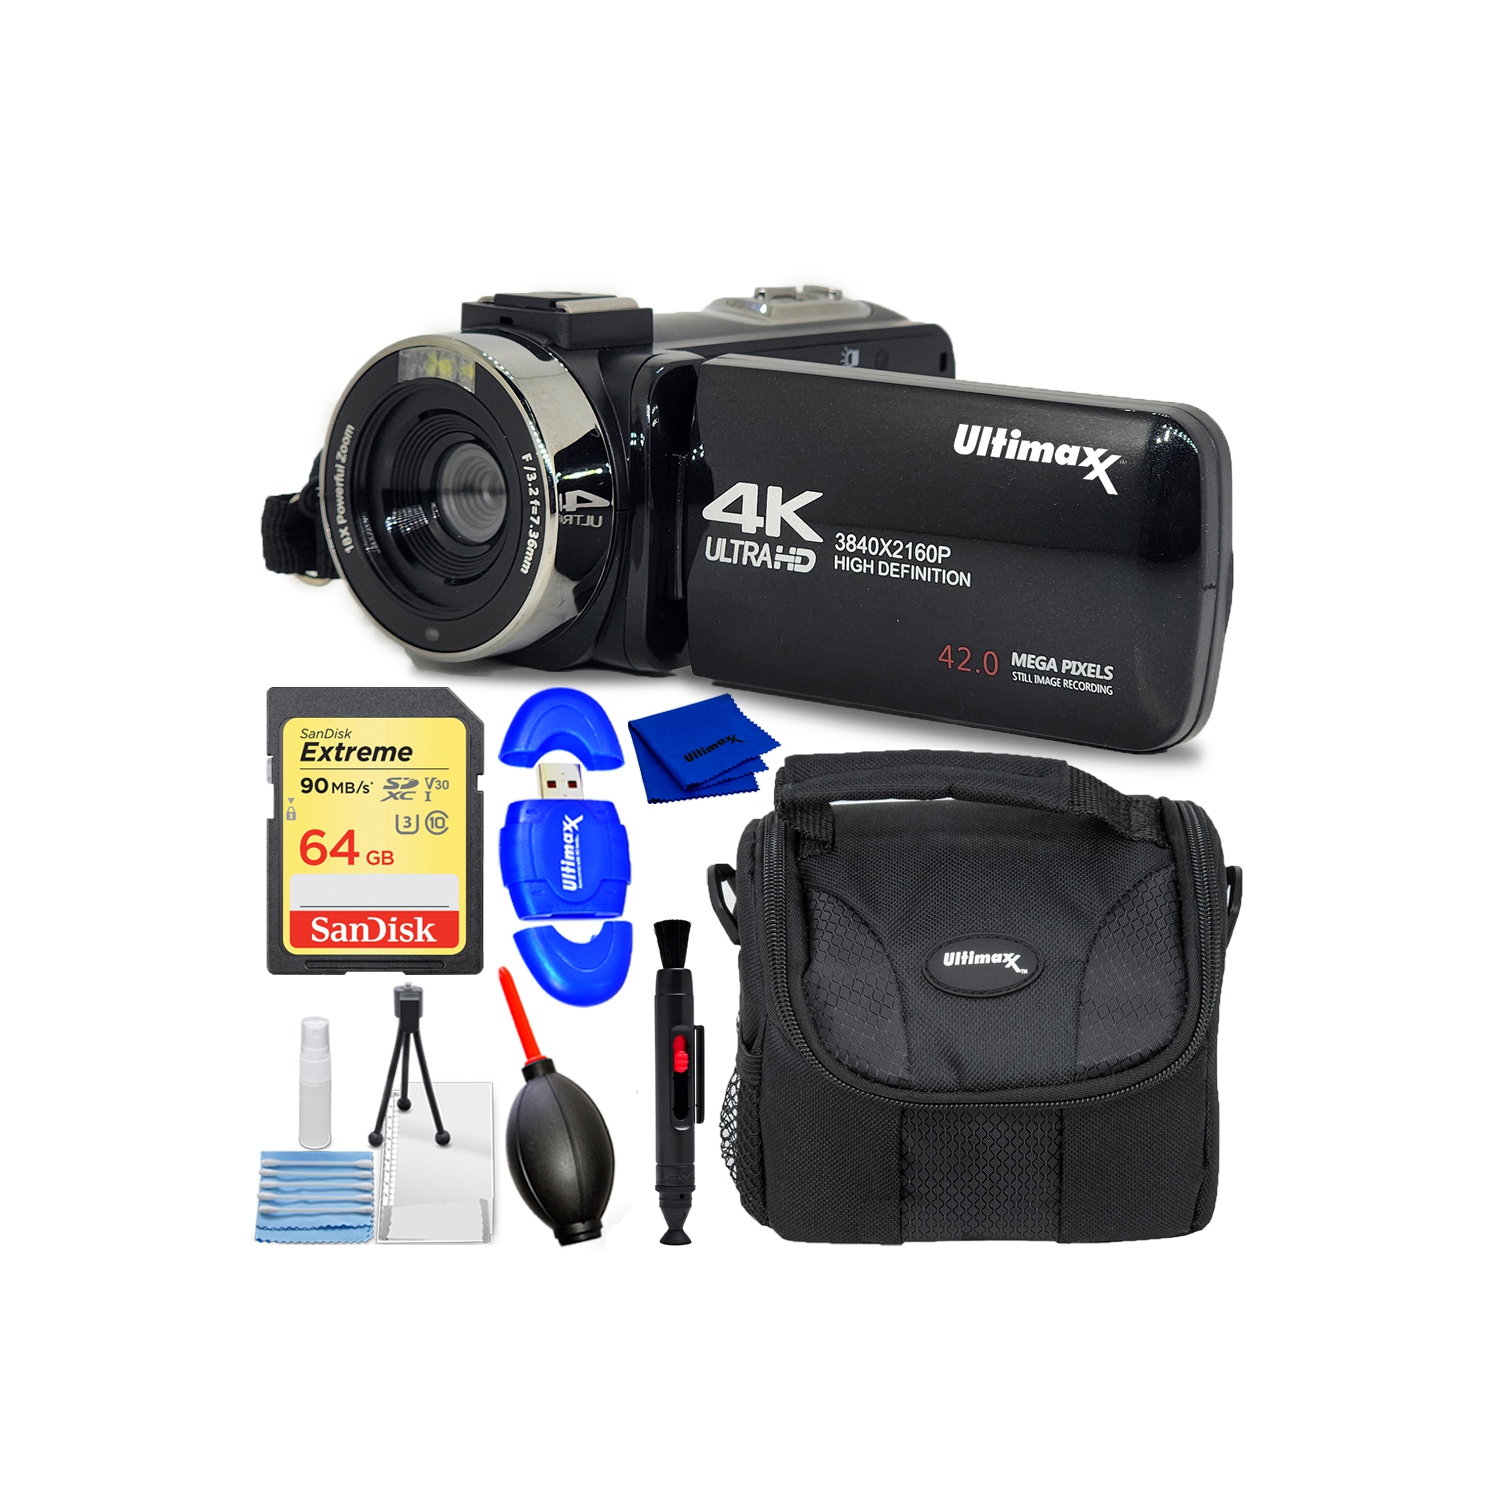 Ultimaxx 4K Ultra HD Camcorder Video Vlogging Camera with LED Light 42MP, 18x Digital Zoom with Remote Control 3.0" LCD Screen Christmas Holiday GIFT Kit